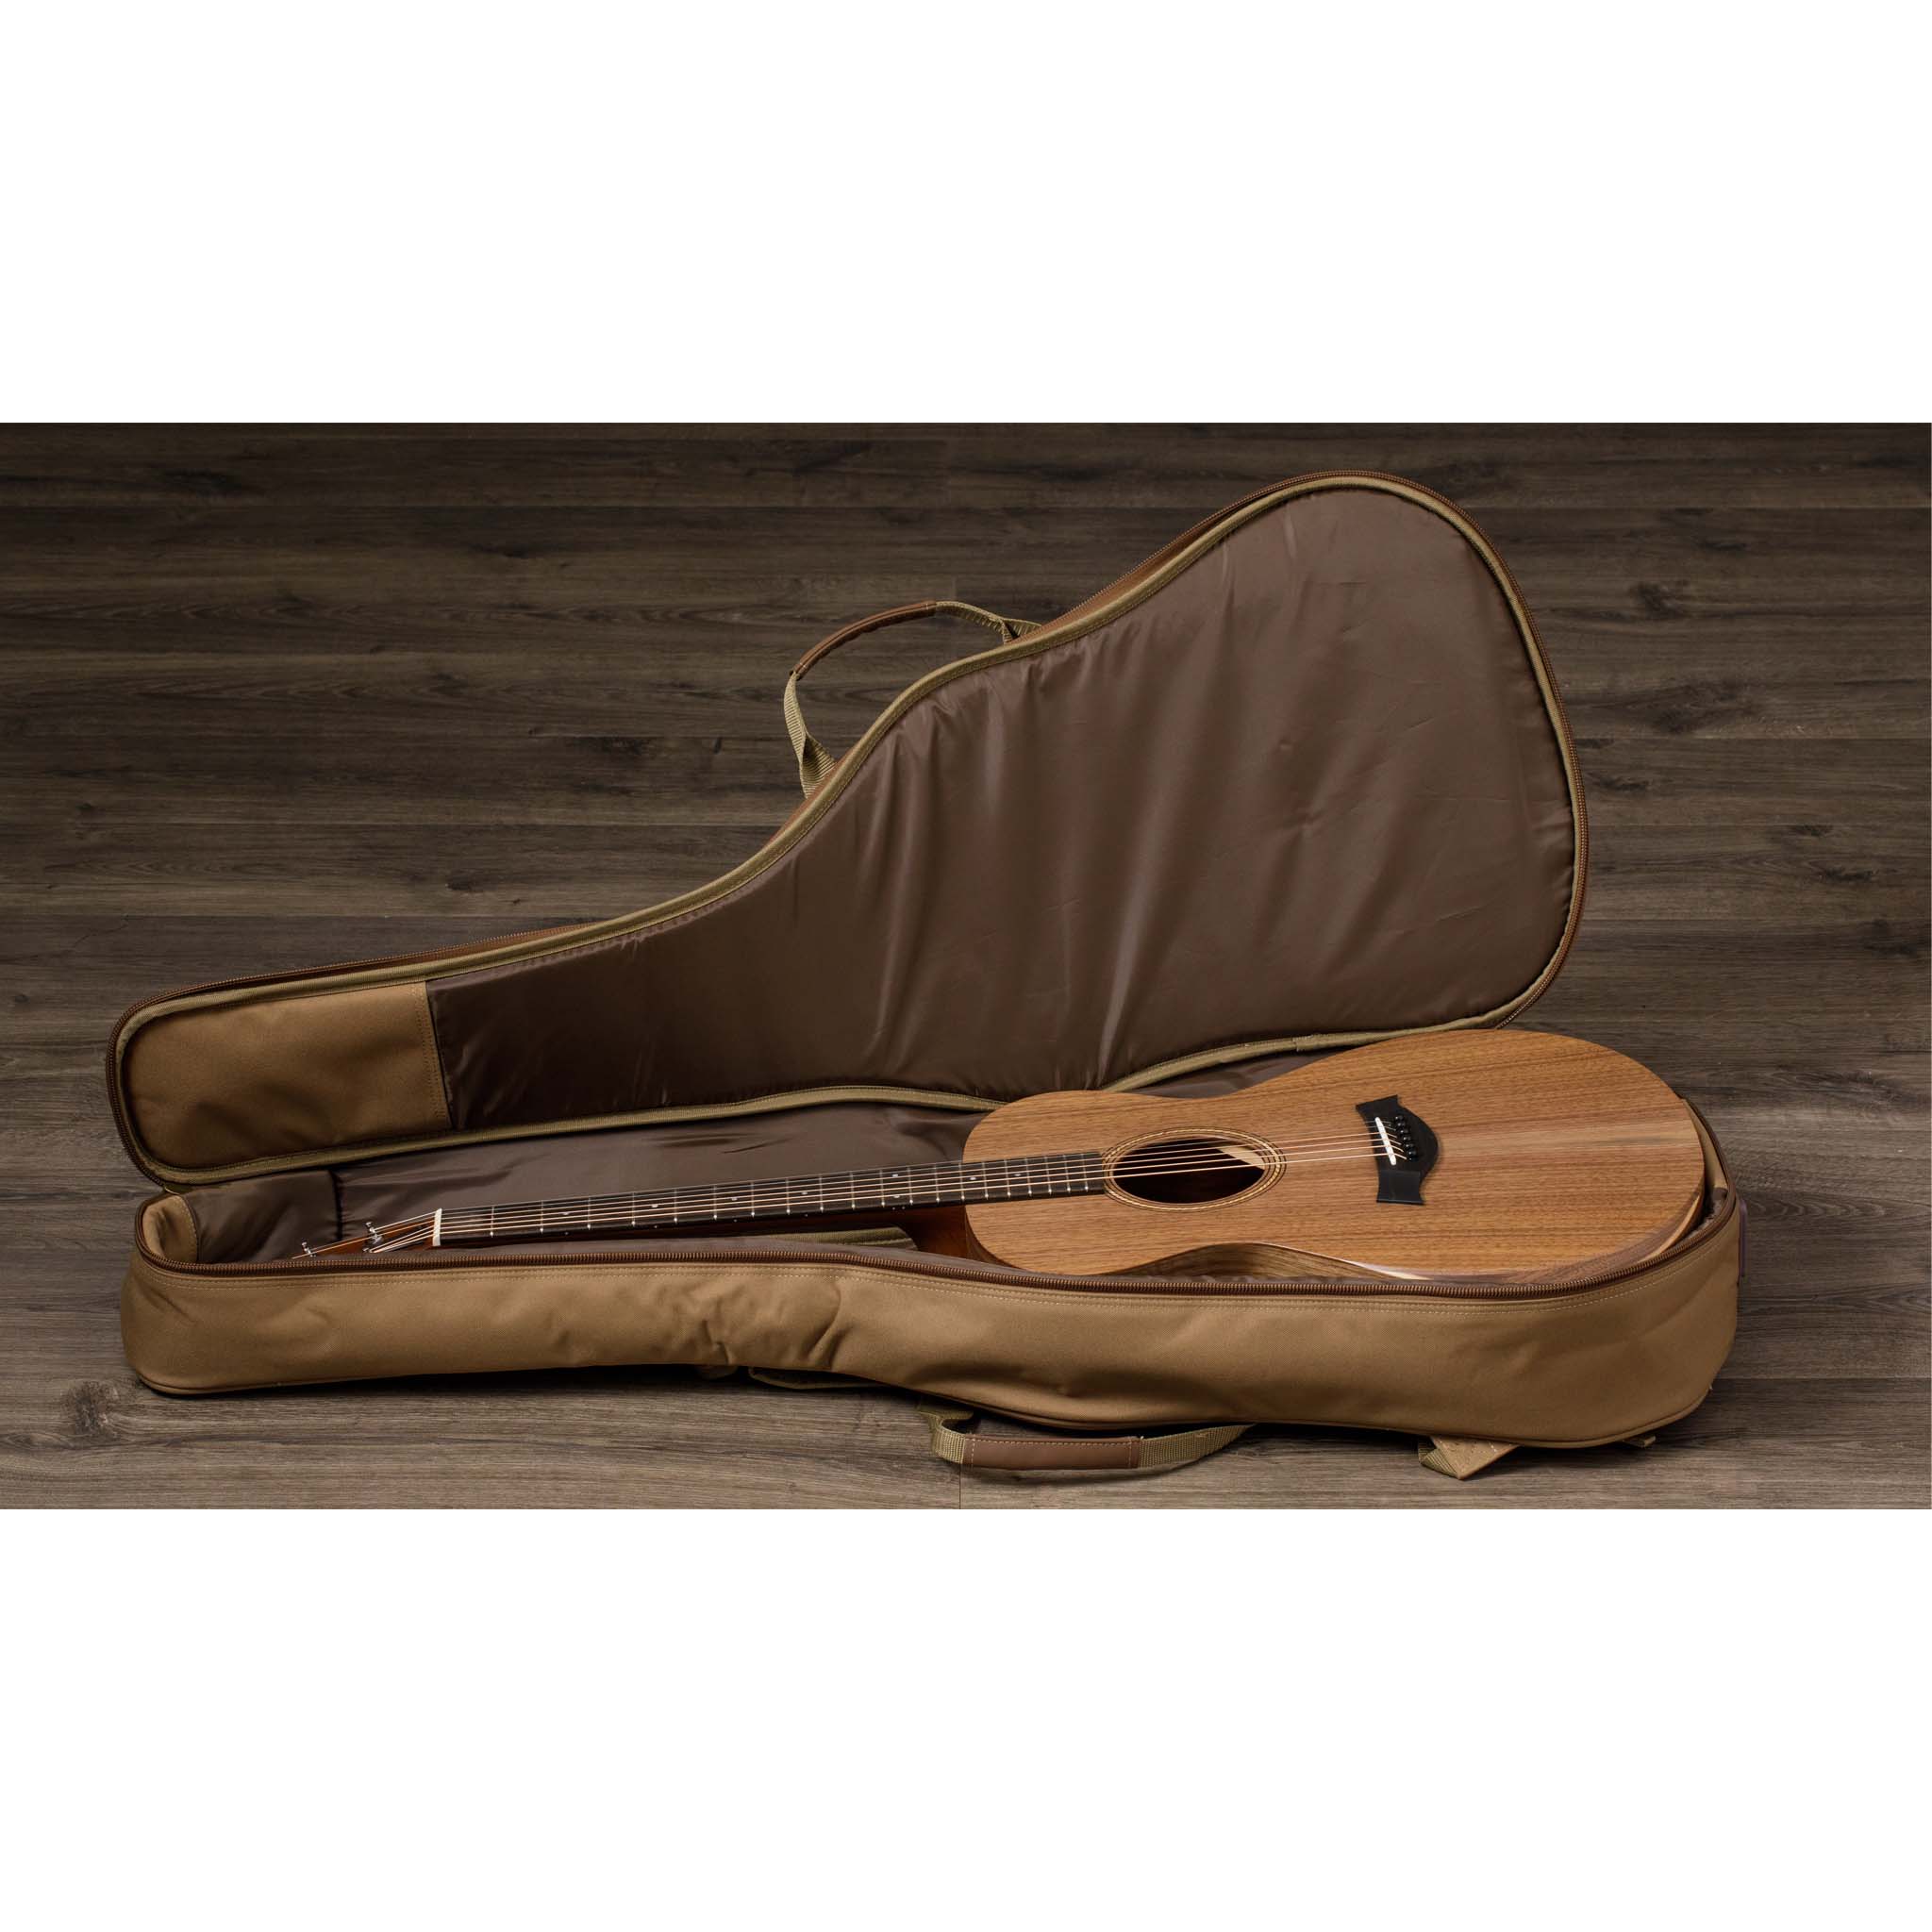 Taylor Academy 22e Layered Walnut Acoustic-Electric Guitar